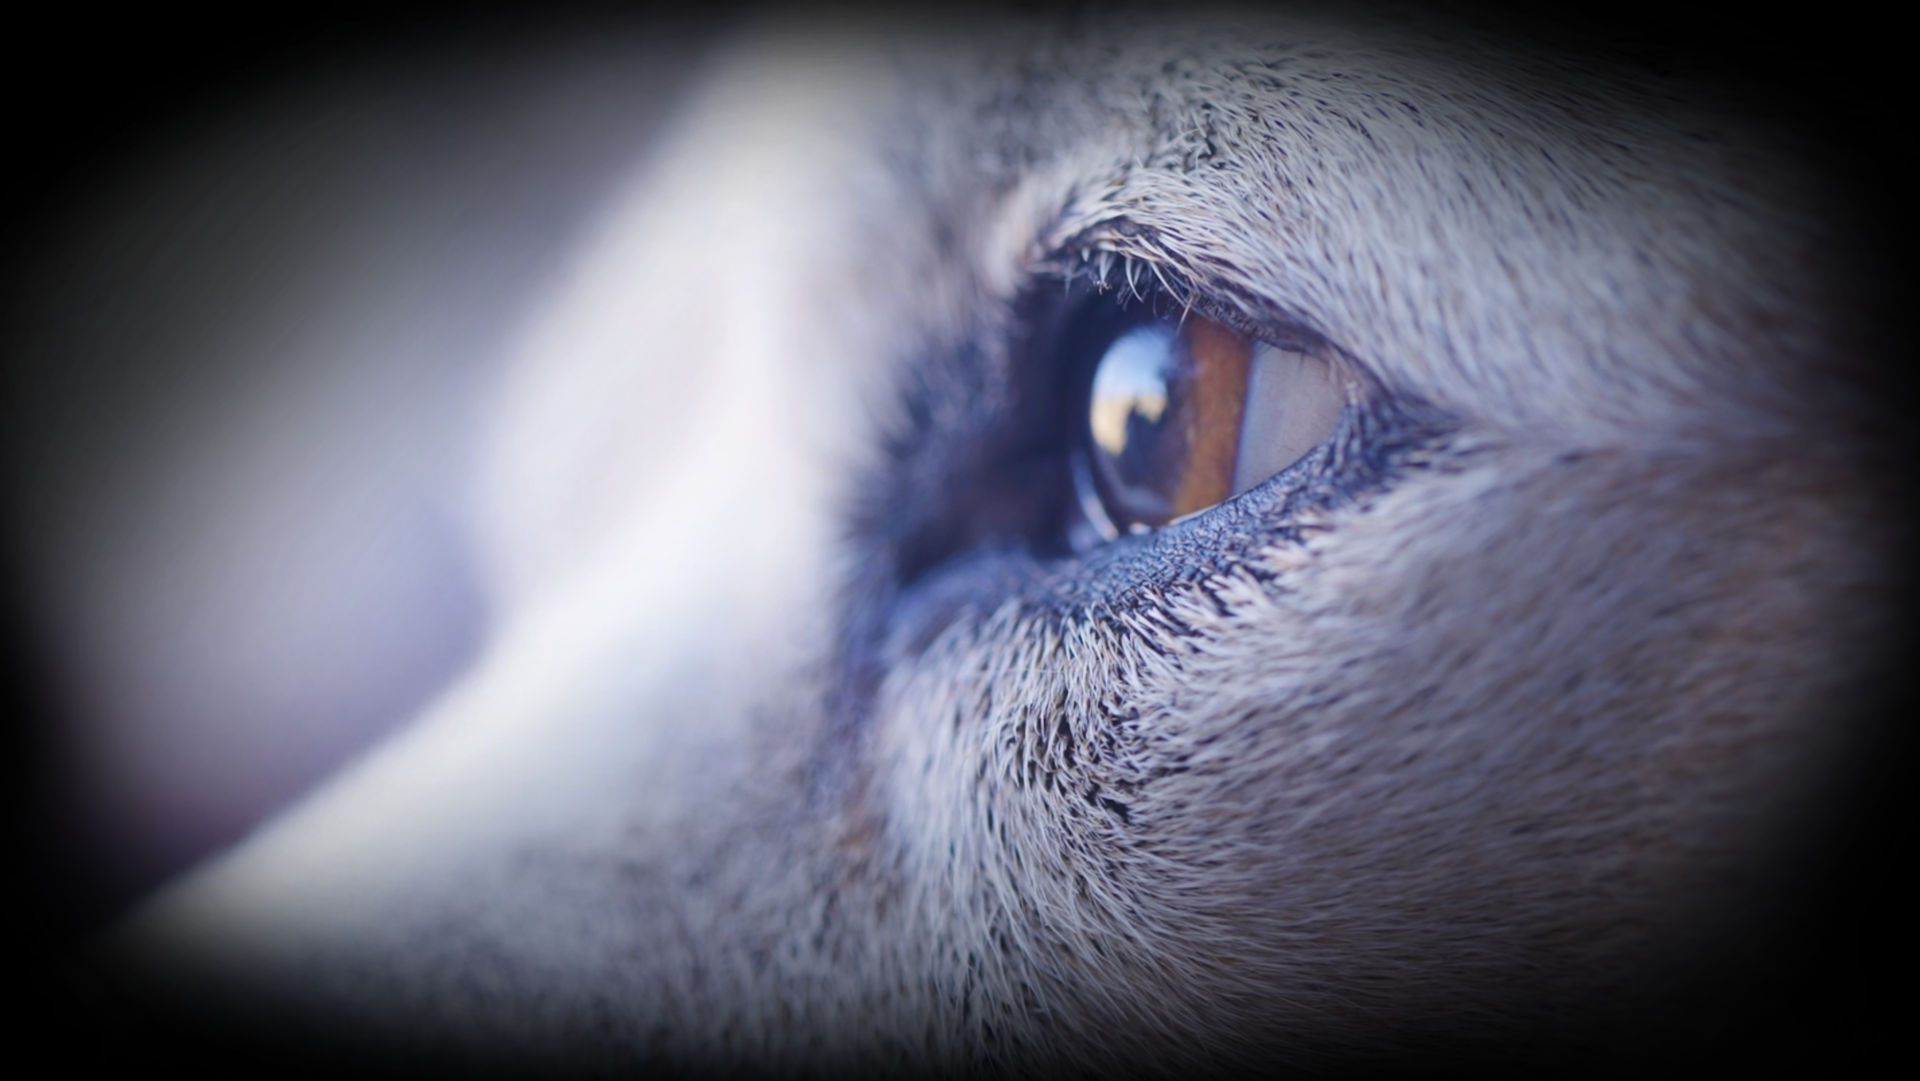 A close-up of a Nyla's brown eye and the fur of her face.